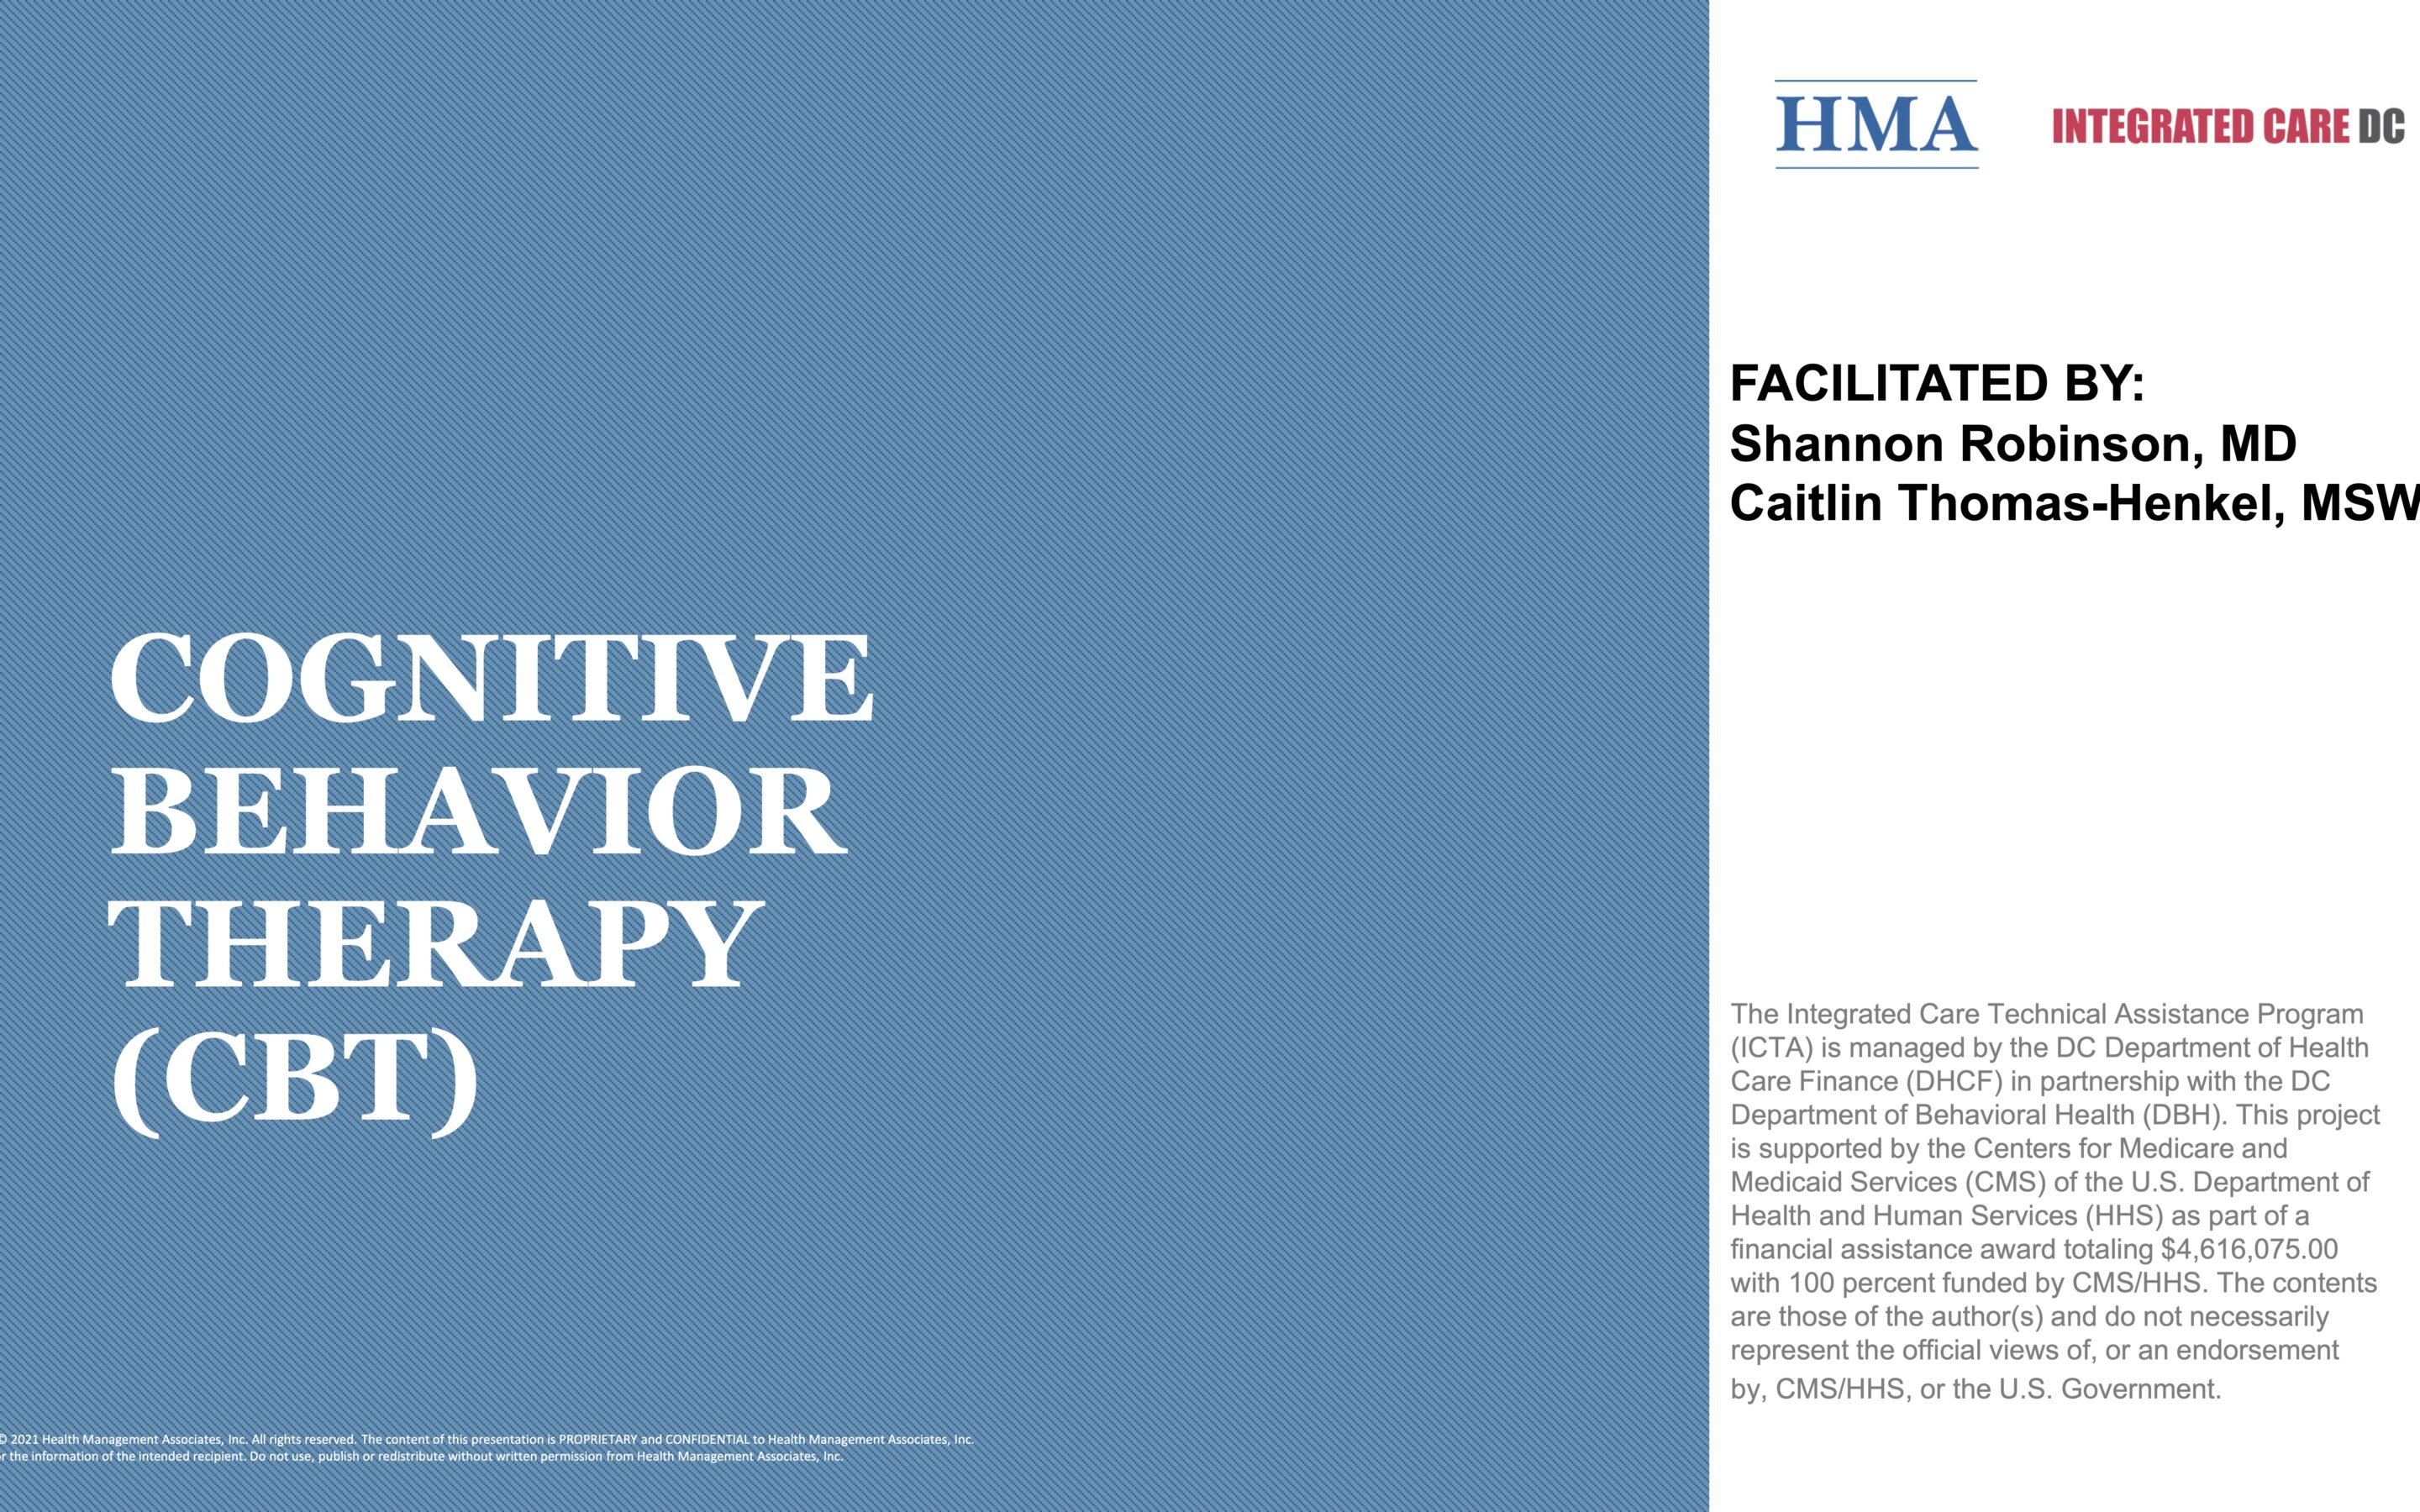 Cognitive Behavior Therapy (CBT)